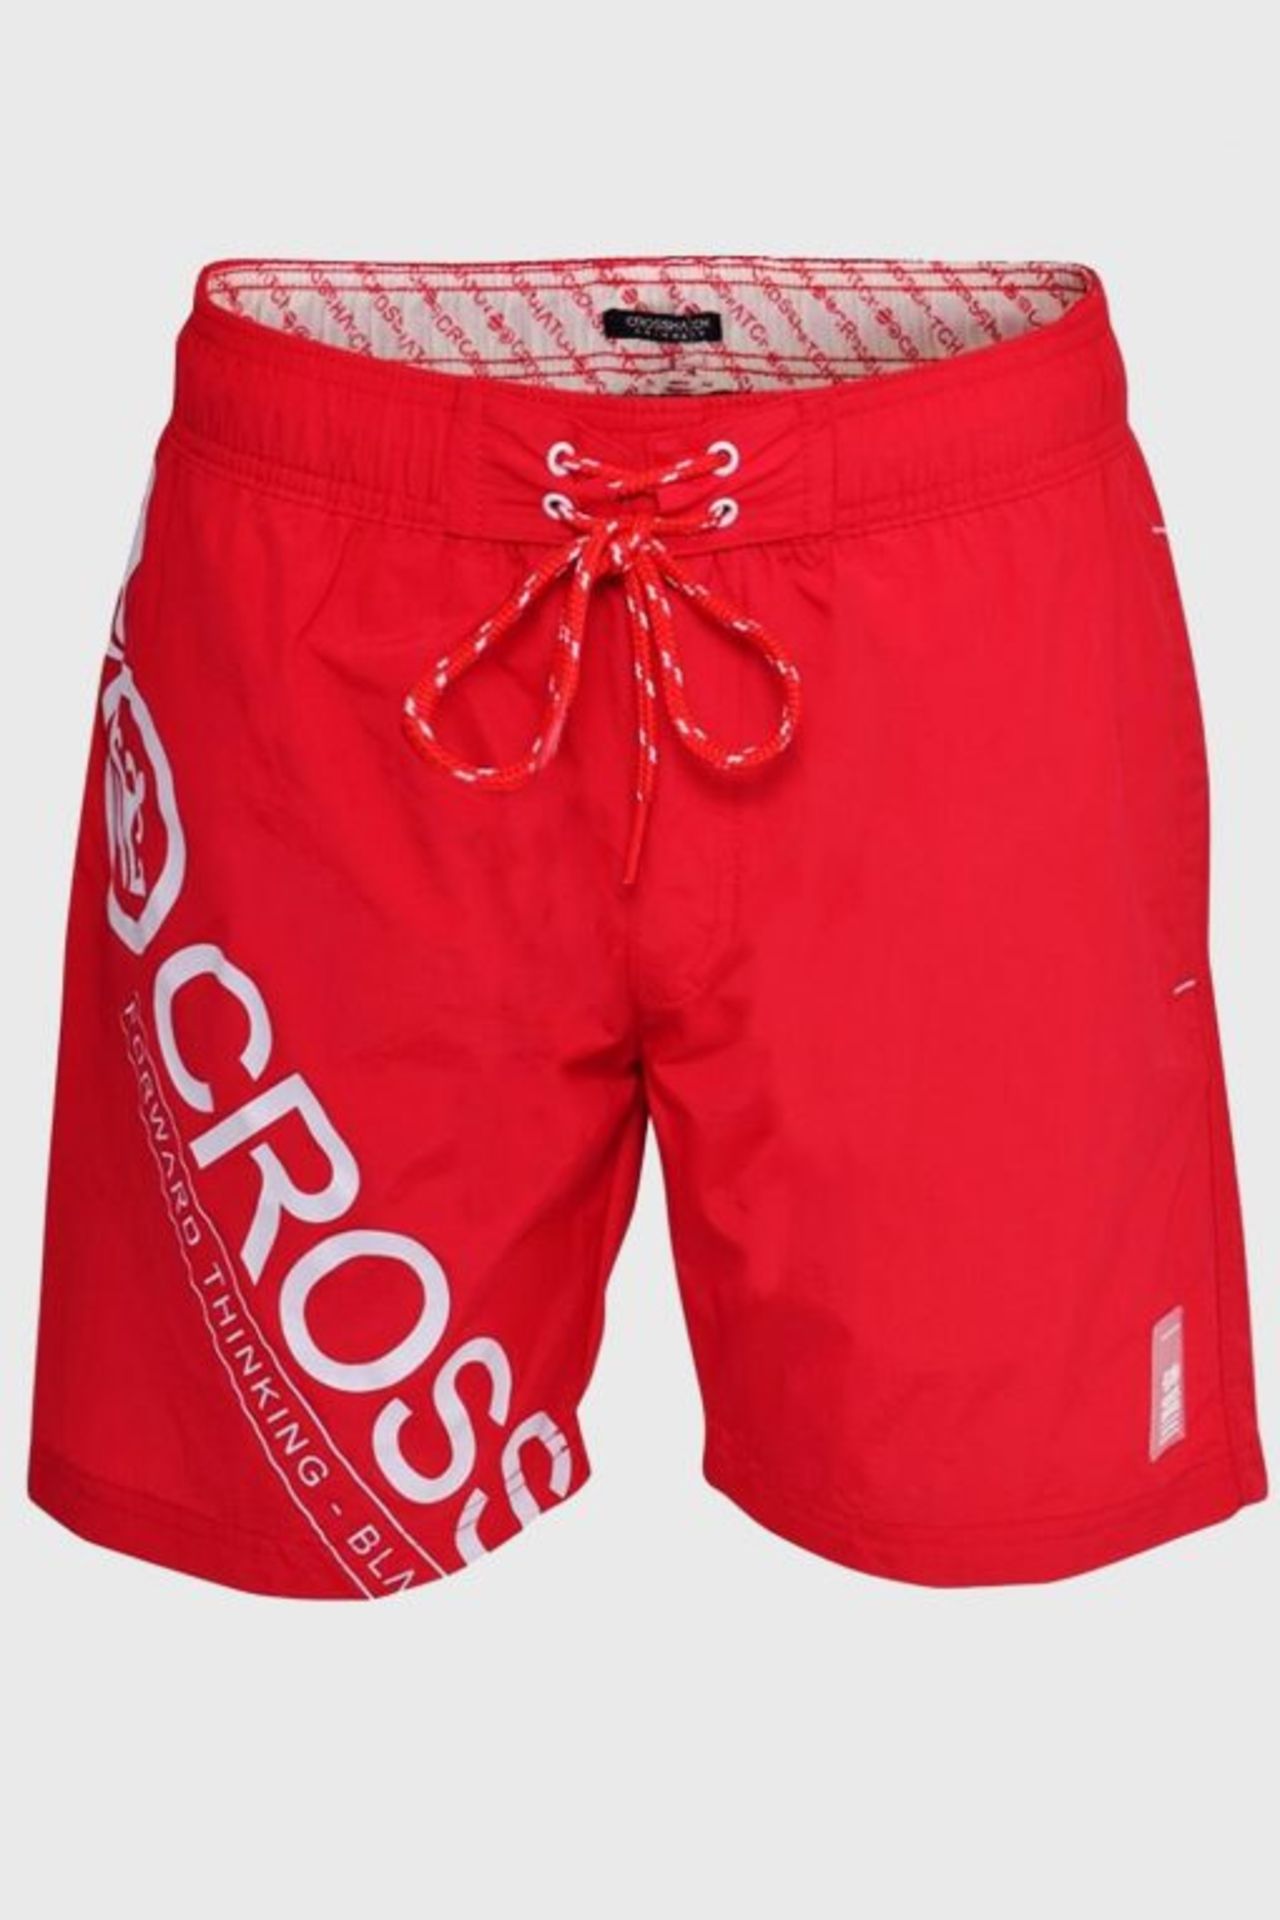 18 X BRAND NEW MEN'S PACIFIC CROSS HATCH SWIM SHORTS IN RED SIZE LARGE, RRP EACH £19.99 TOTAL £359.